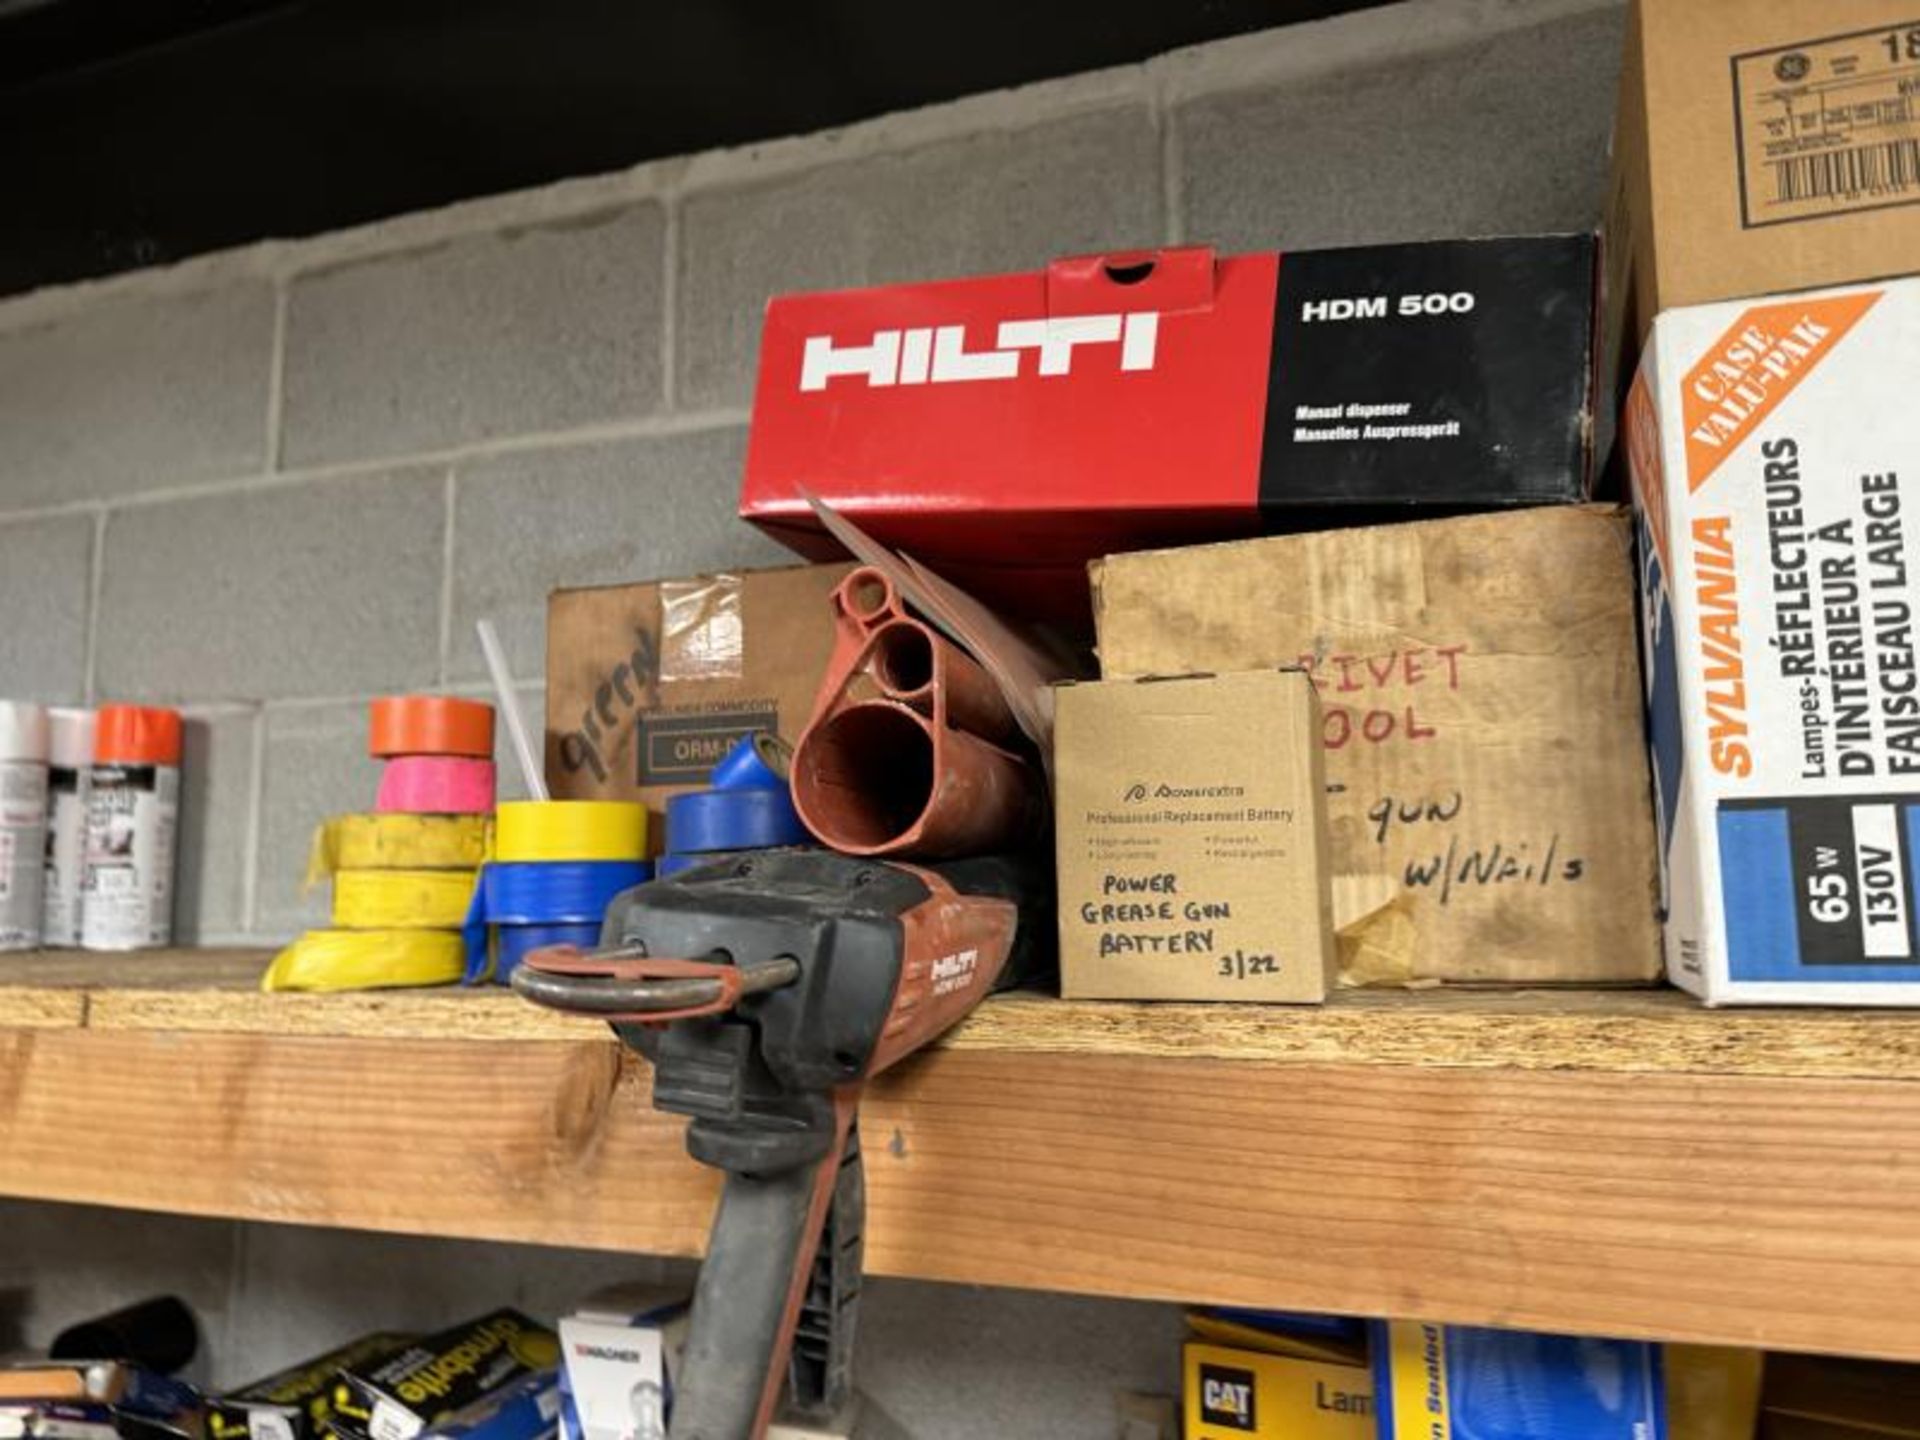 Contents of Shelving Unit (NOT SHELF) Including: Spray Paint, Concrete Adhesive, Vehicles Fuses, Veh - Image 9 of 11